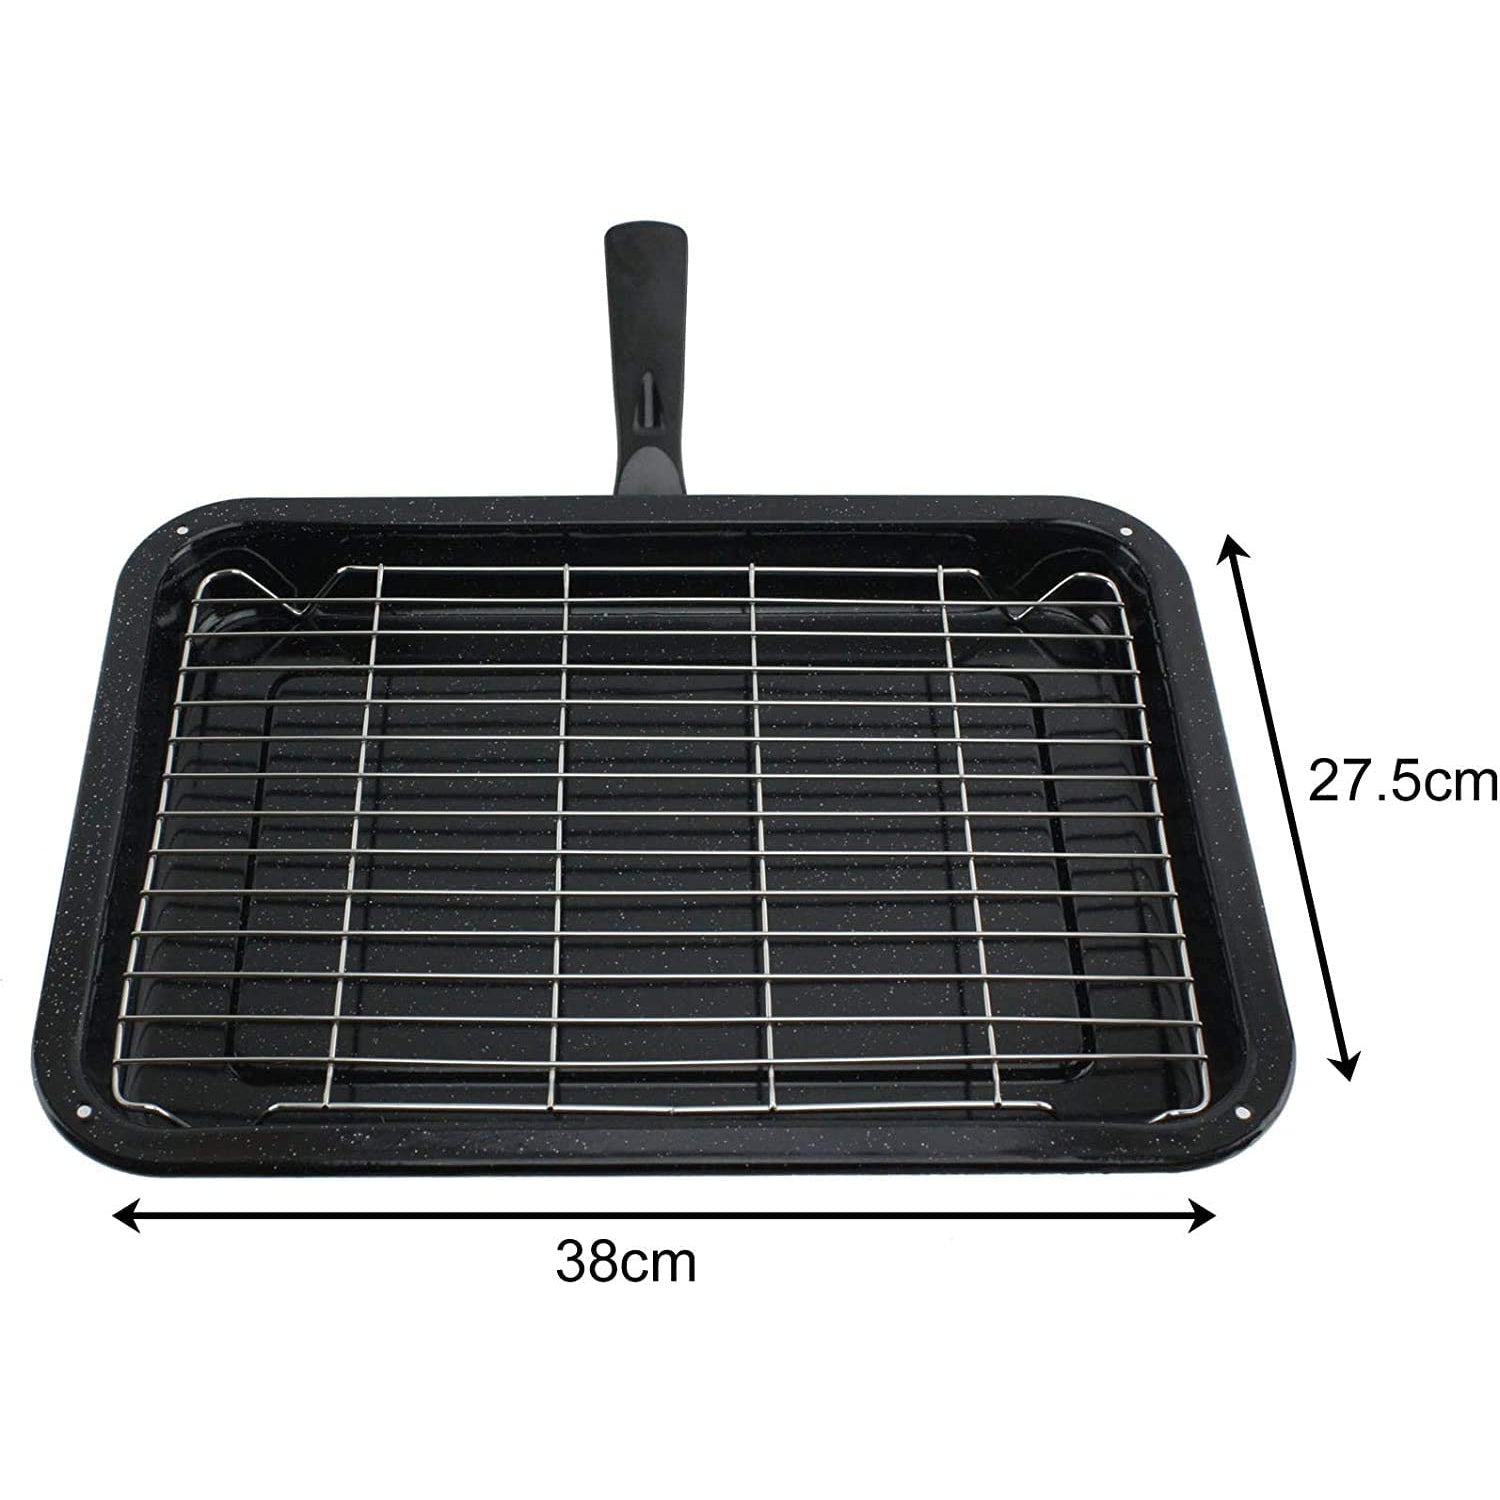 Small Grill Pan + Rack and Detachable Handle for RANGEMASTER Oven Cooker